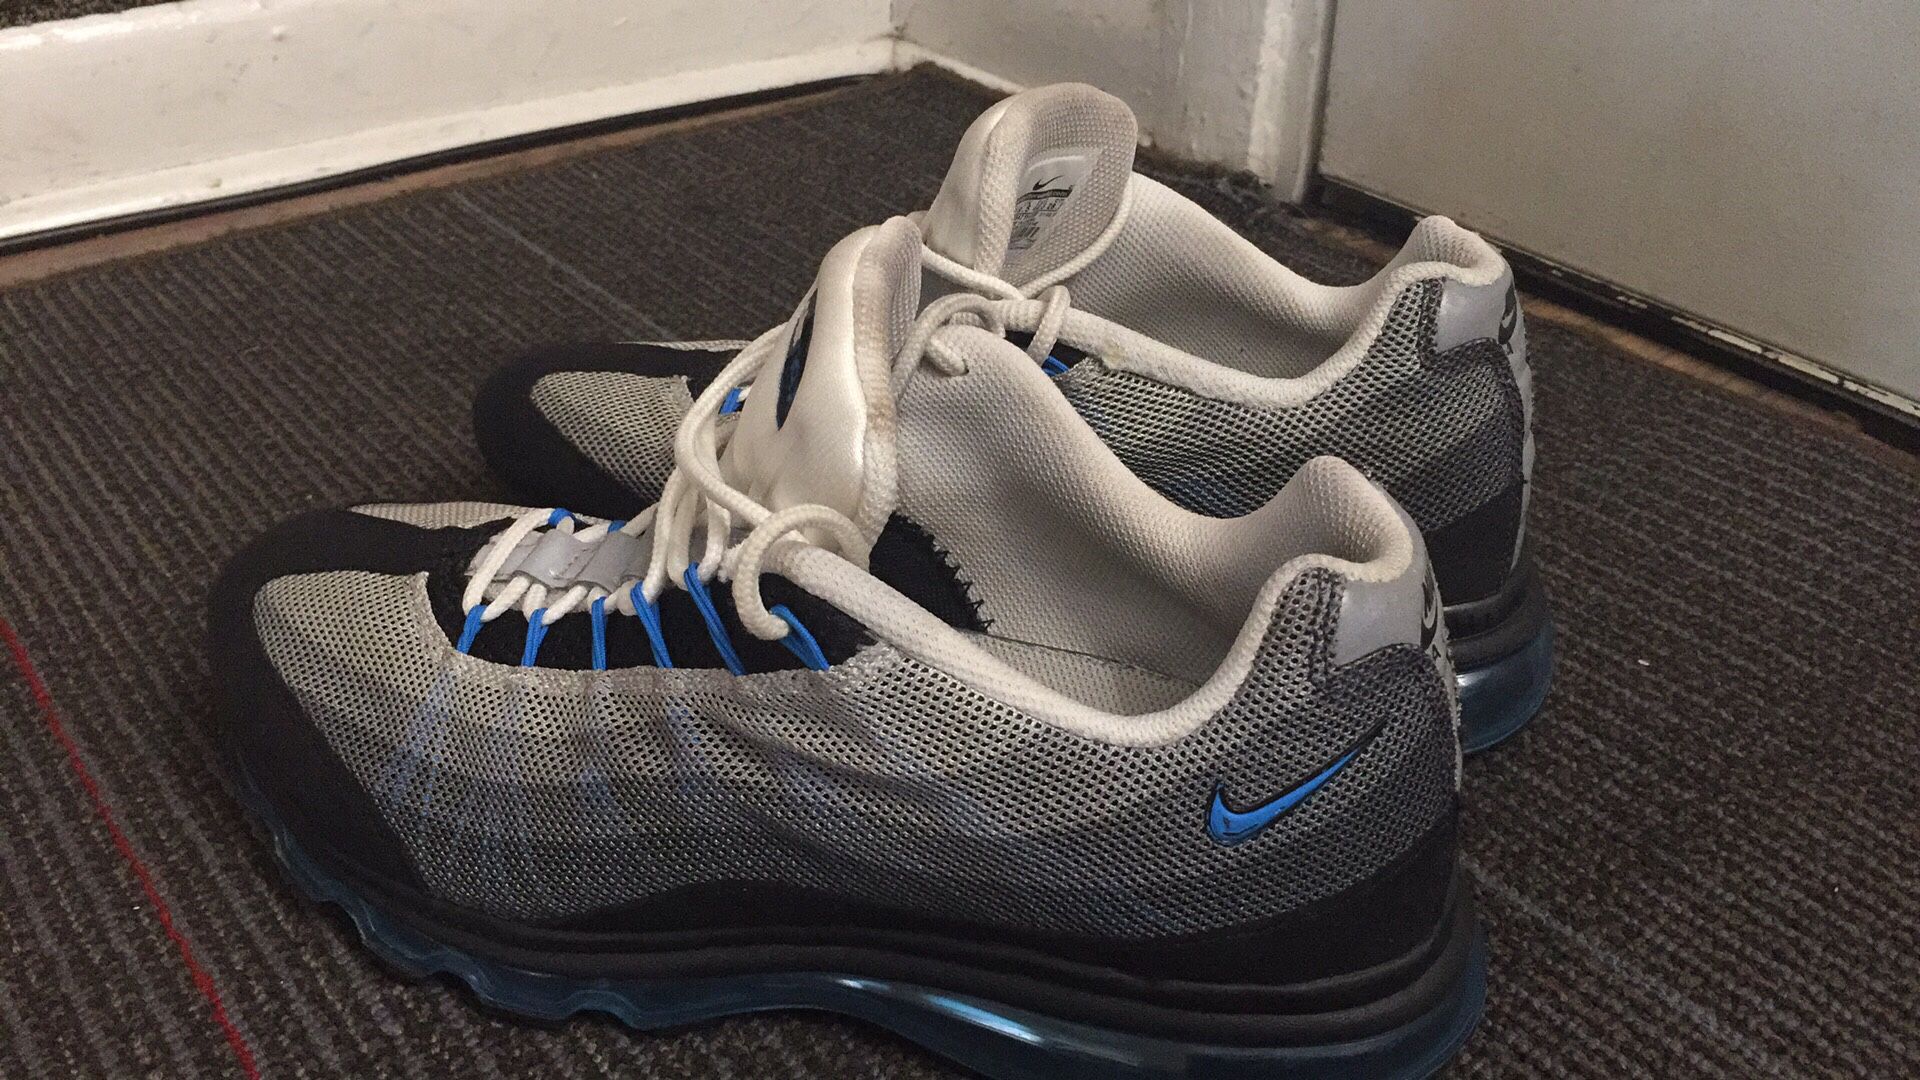 Nike airmax shoes size 10.5